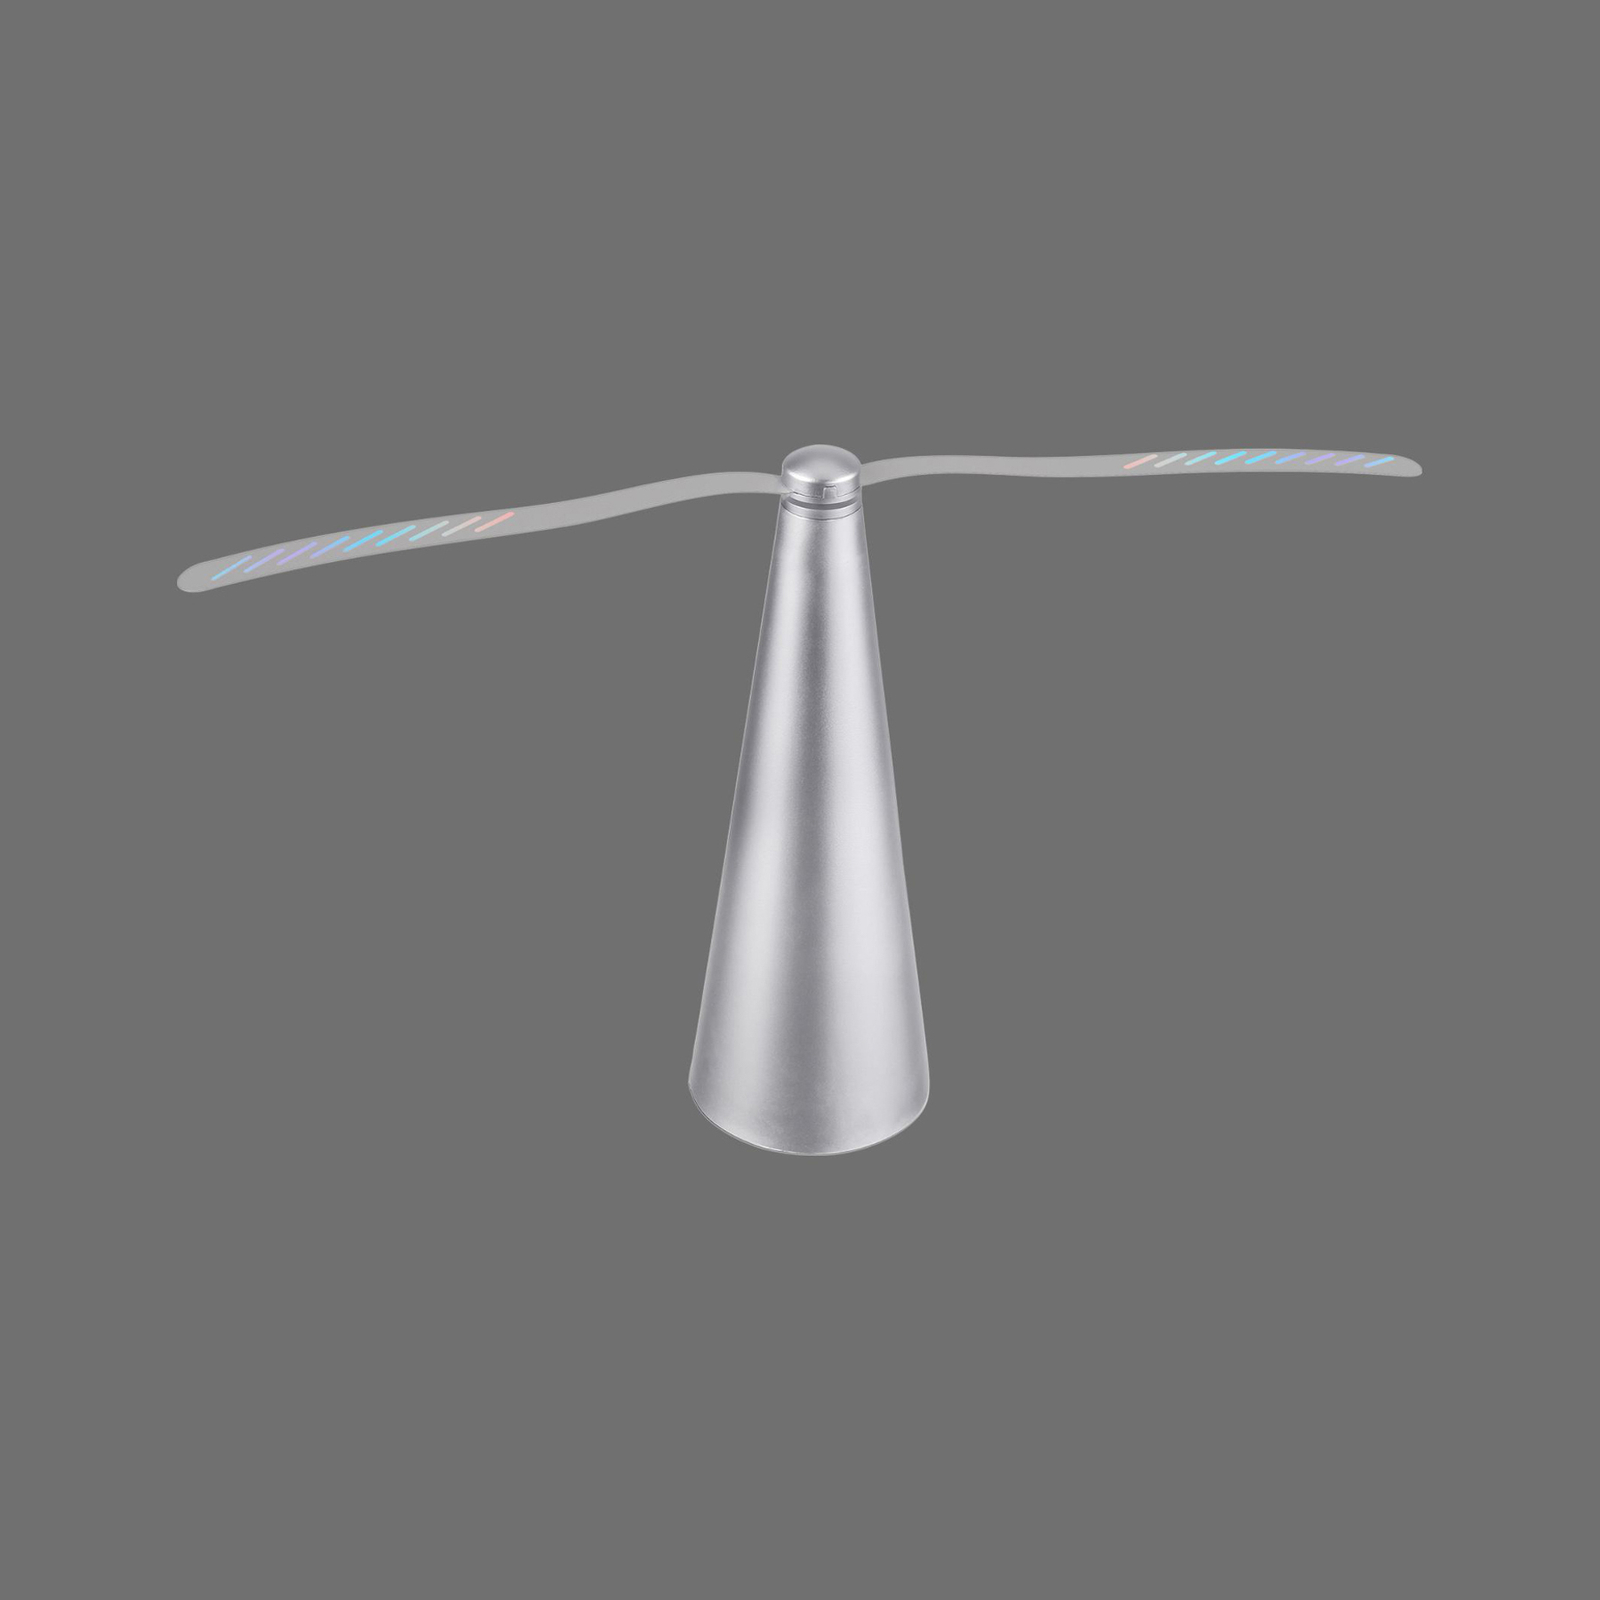 JUST LIGHT. Swat fly whisk, battery-operated, silver